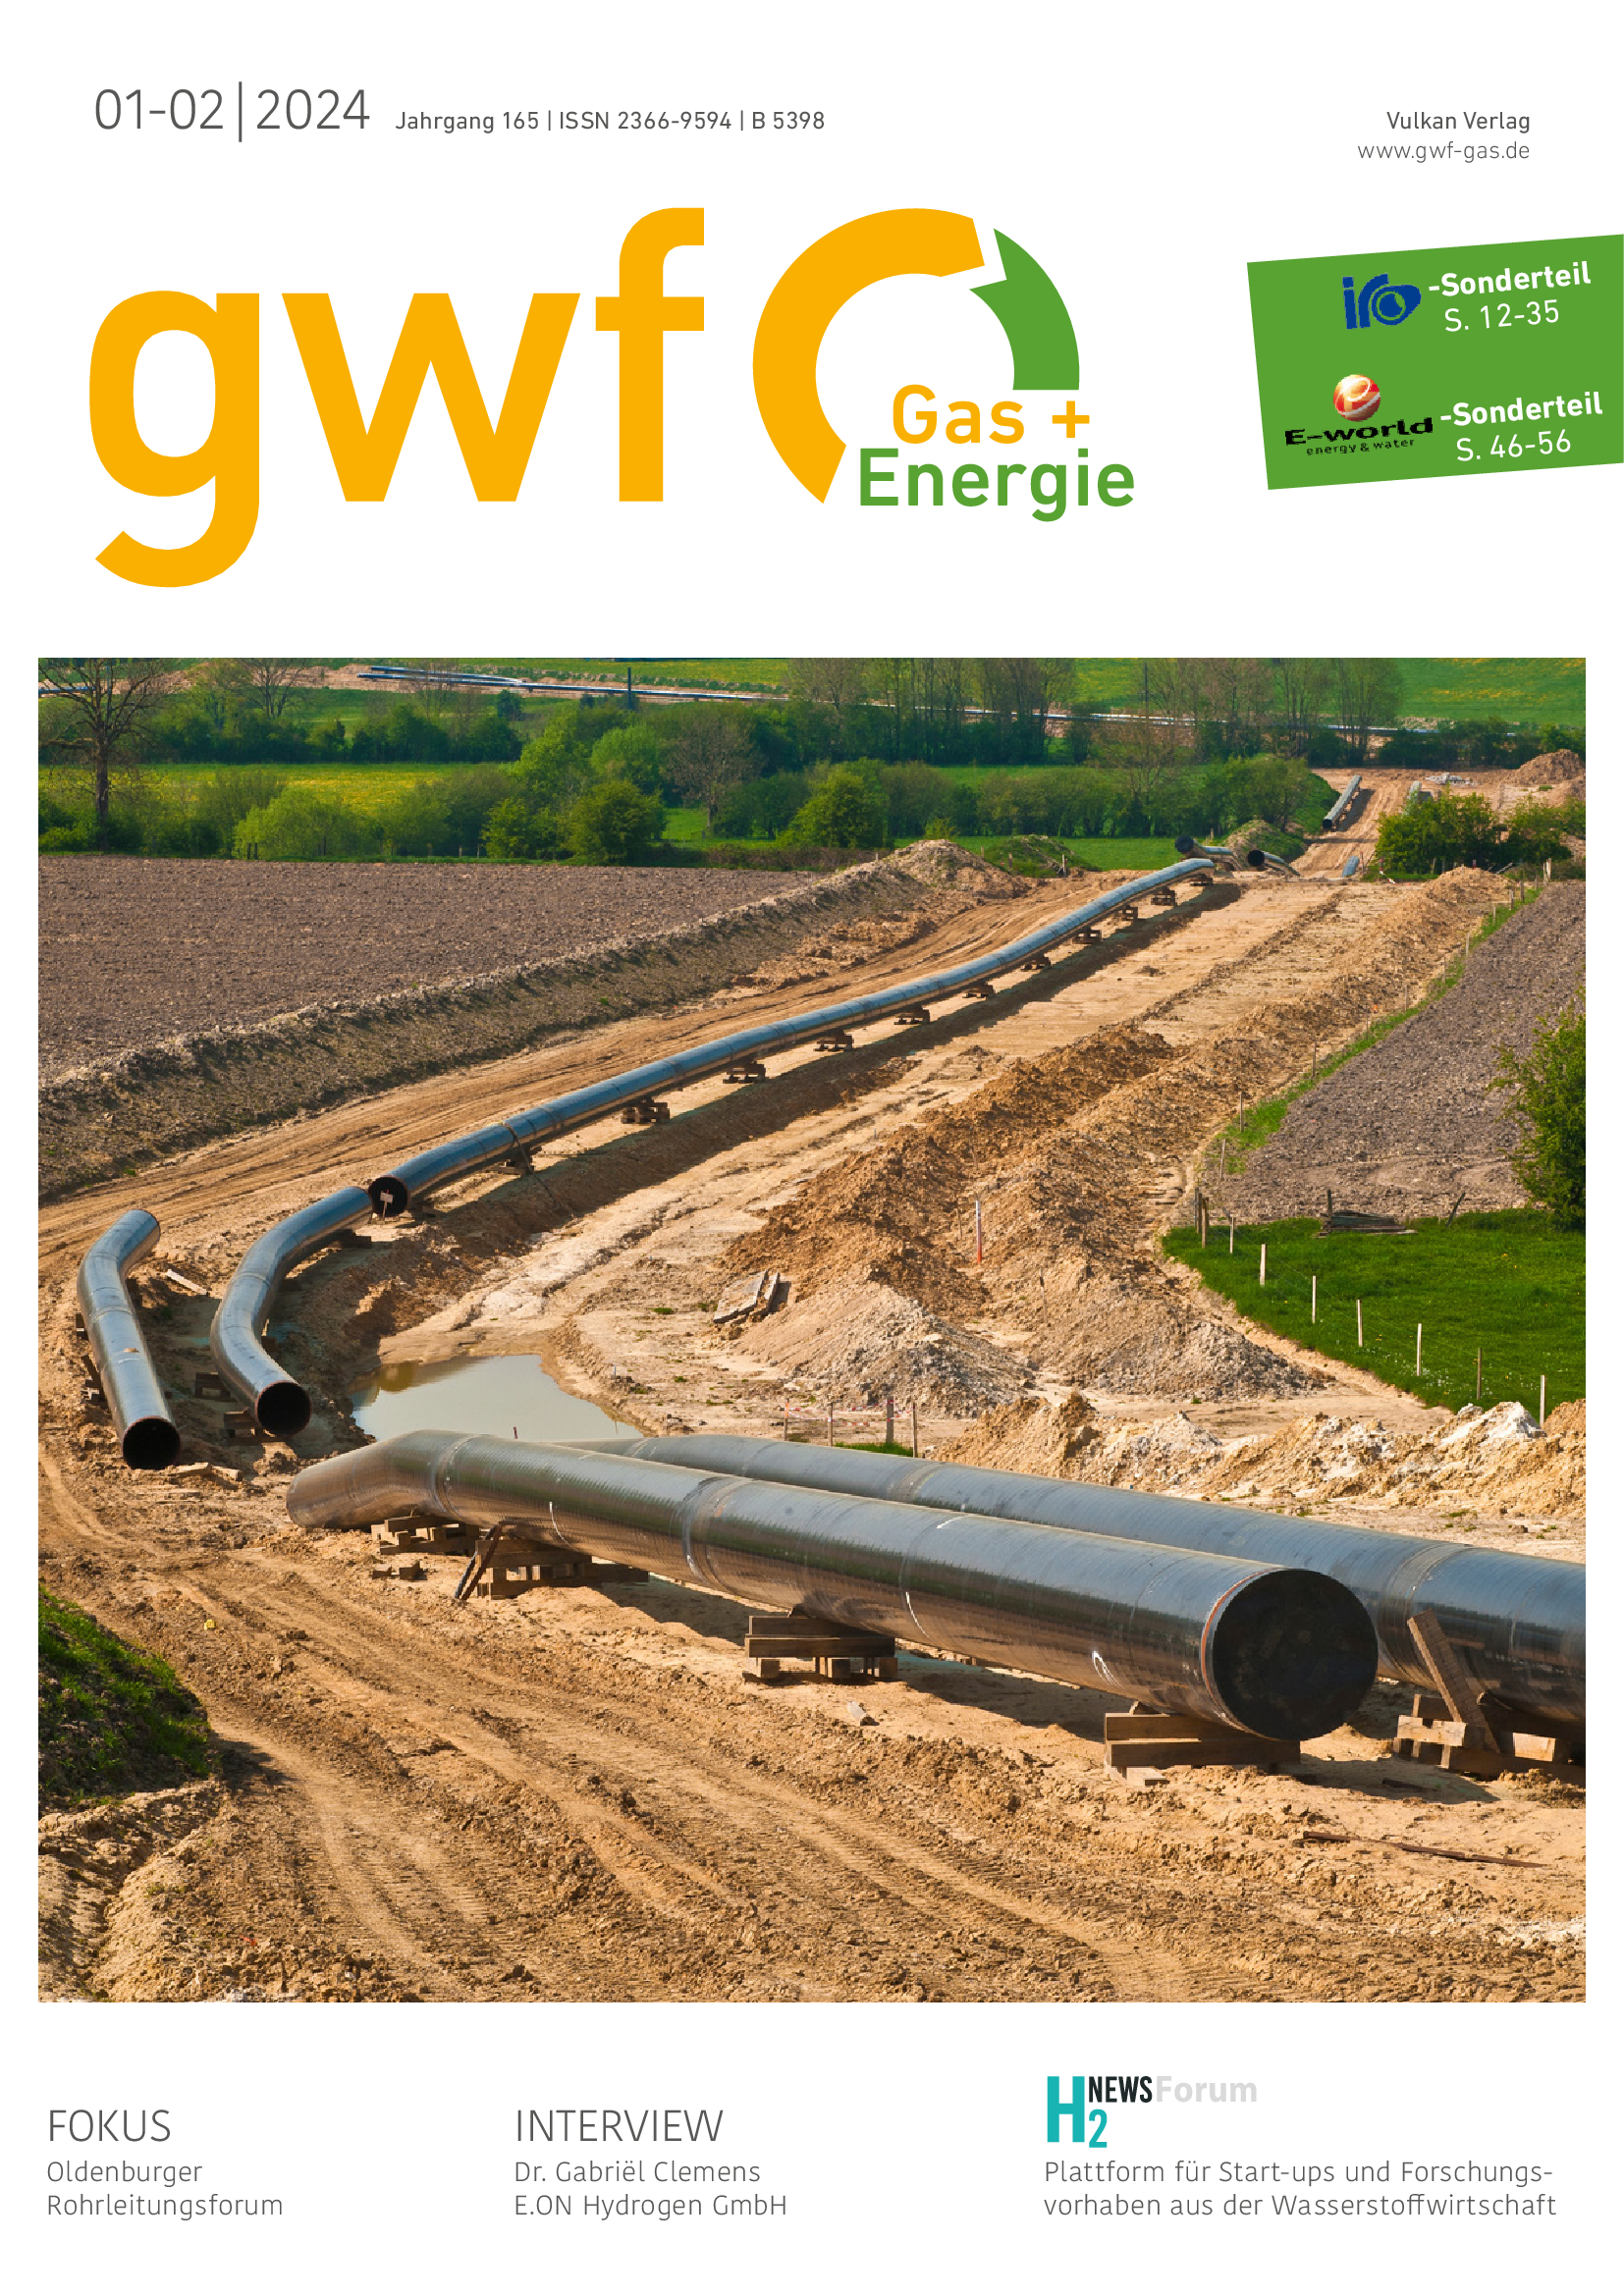 gwf Gas Cover 11 12